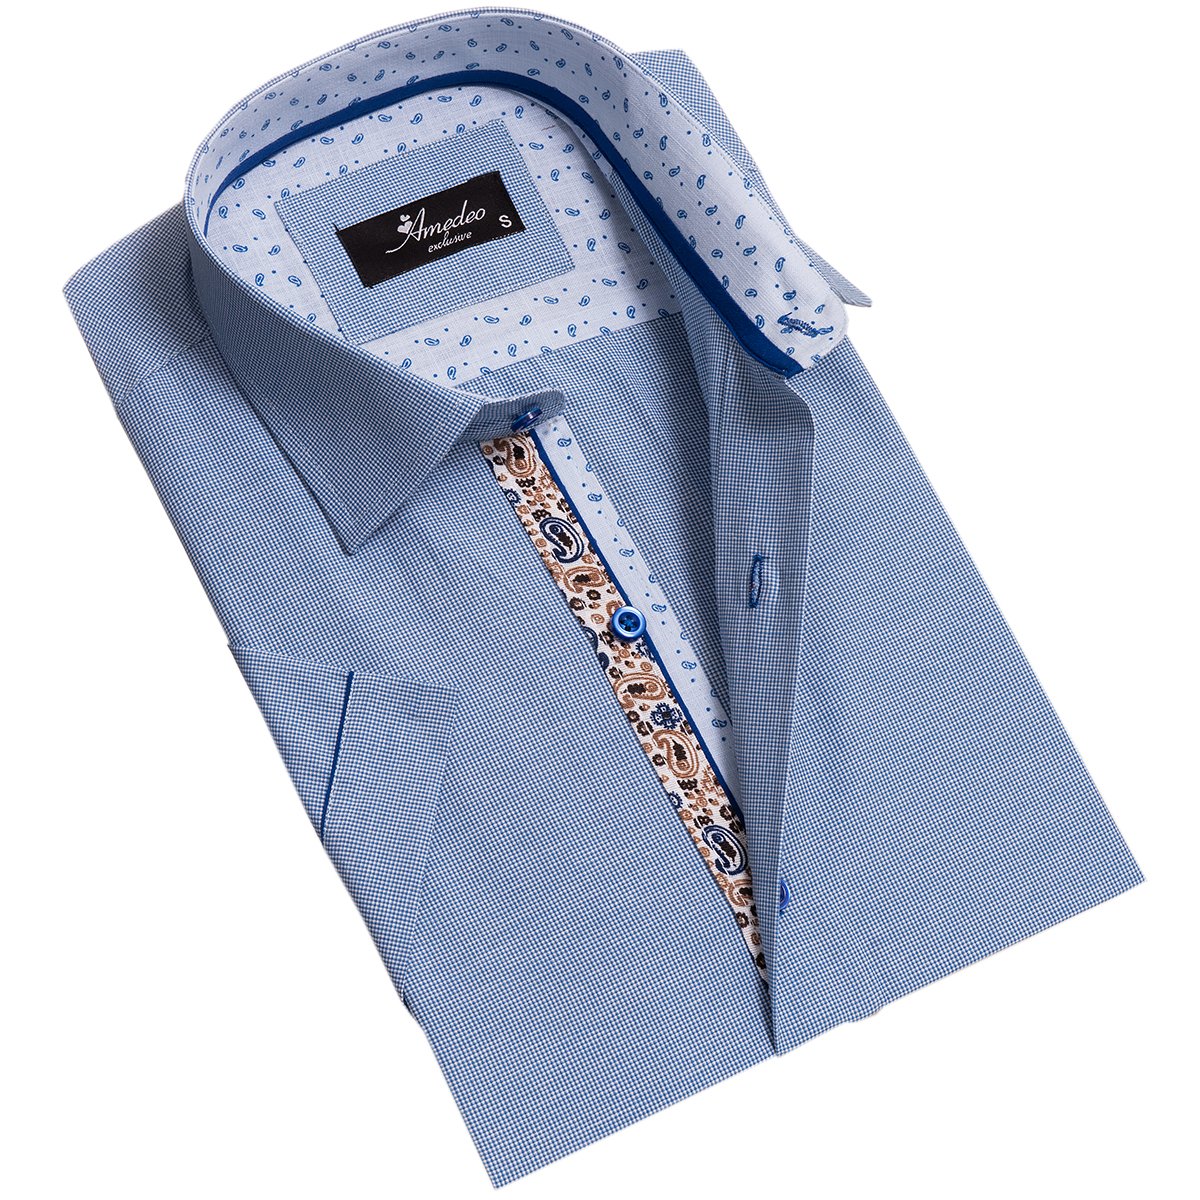 Picture of a Premium Men's Short Sleeve Button Up Shirt in Blue product only